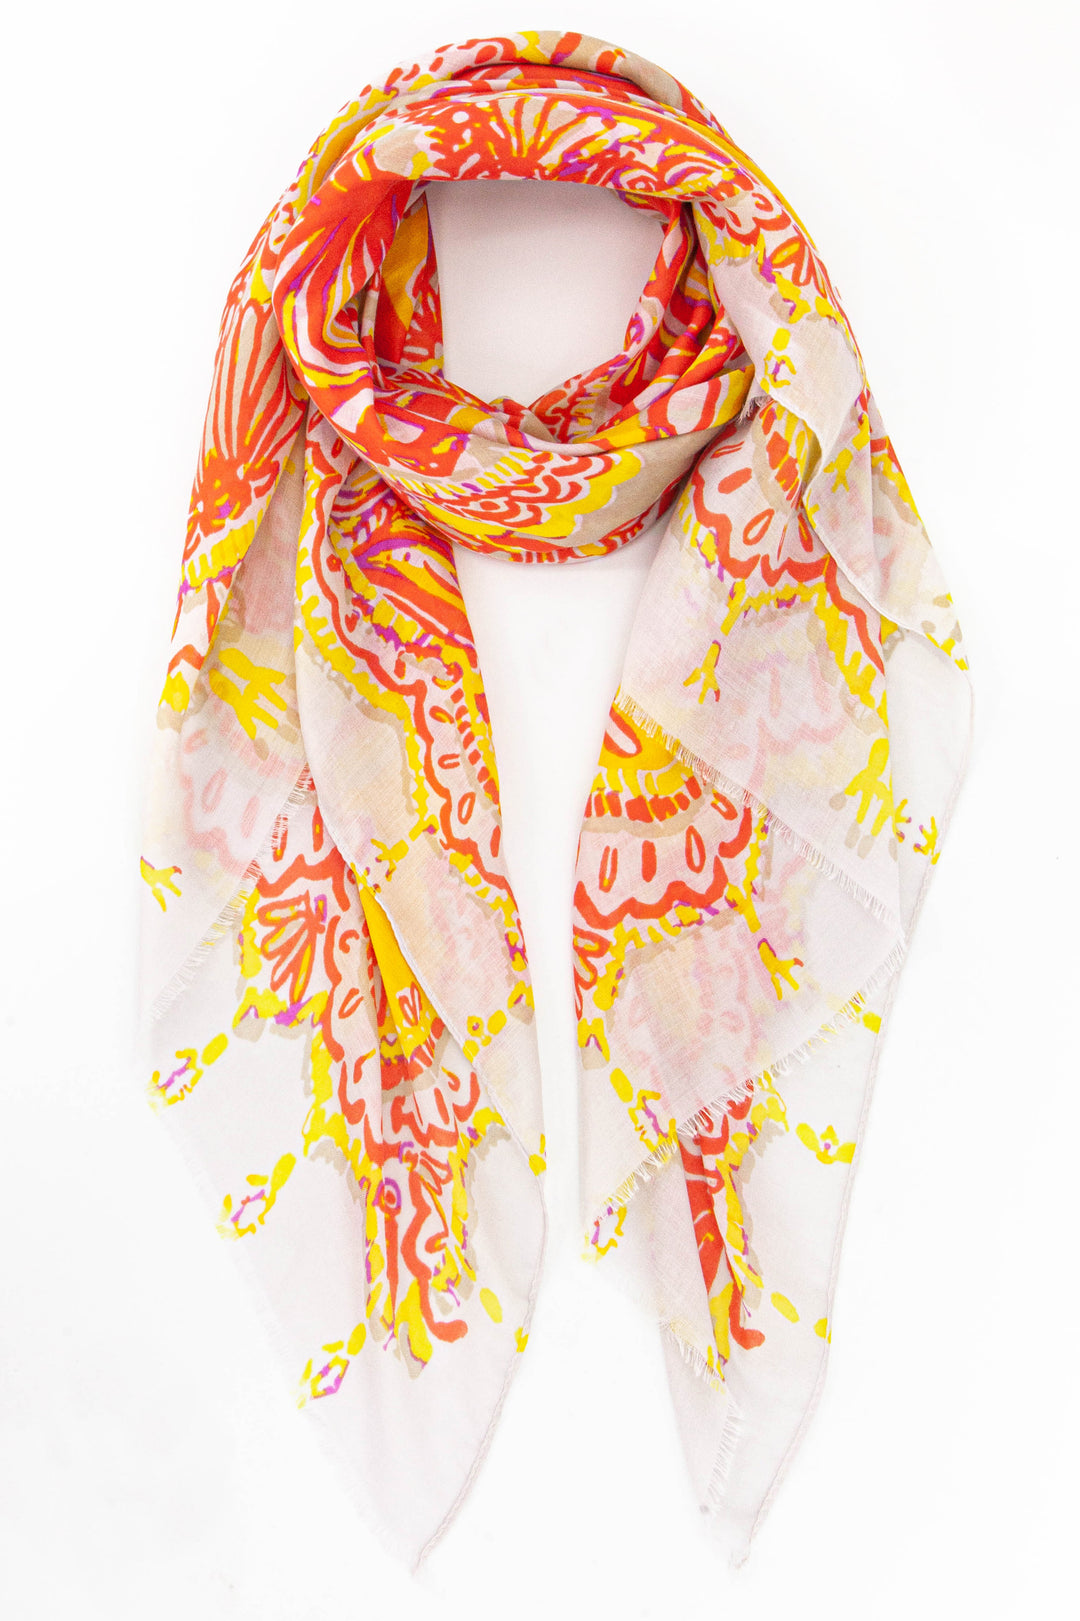 orange and yellow ornate pattern lightweight scarf featuring seashells and fish